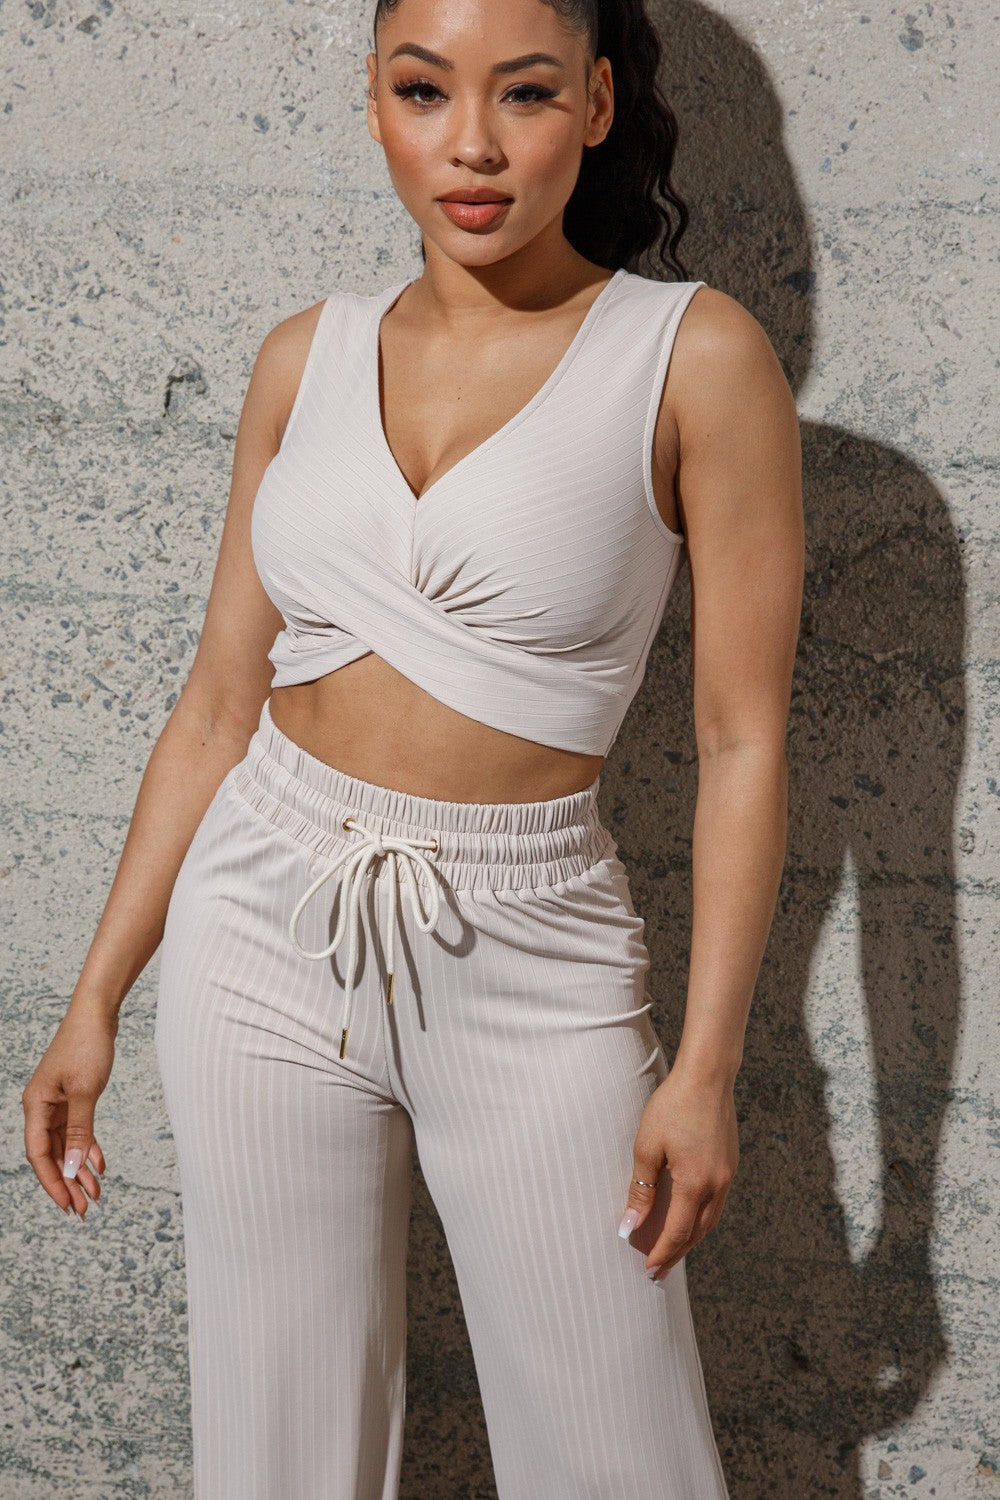 Adelaide Two Piece Set - Crop Top and Wide Leg Pants Set in White | Showpo  USA